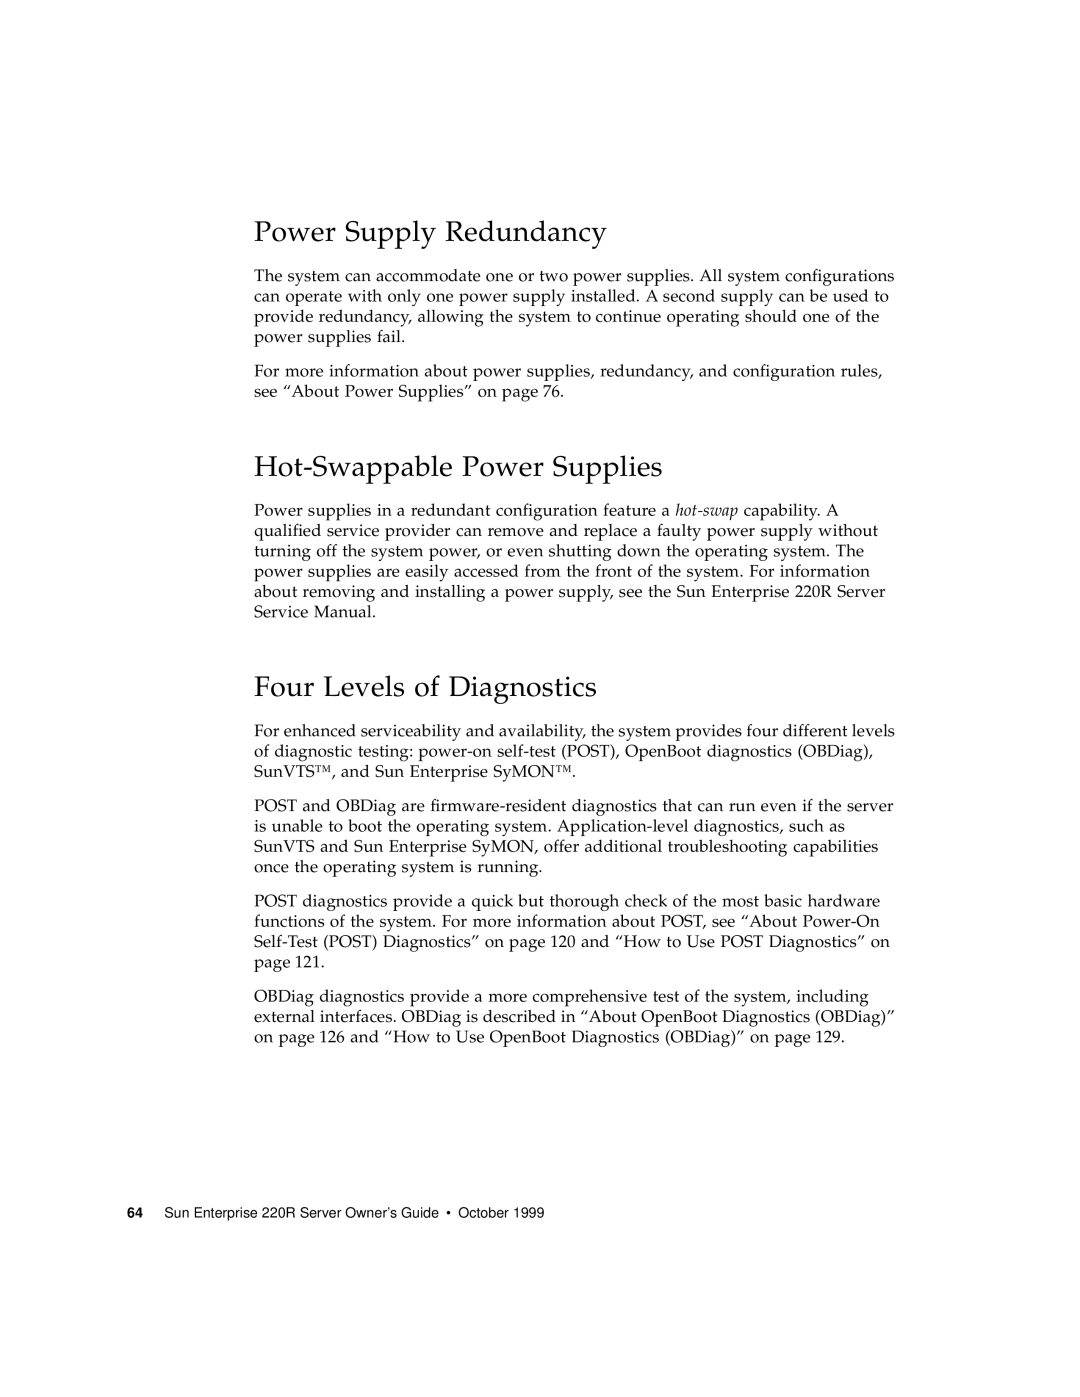 Sun Microsystems 220R manual Power Supply Redundancy, Hot-Swappable Power Supplies, Four Levels of Diagnostics 